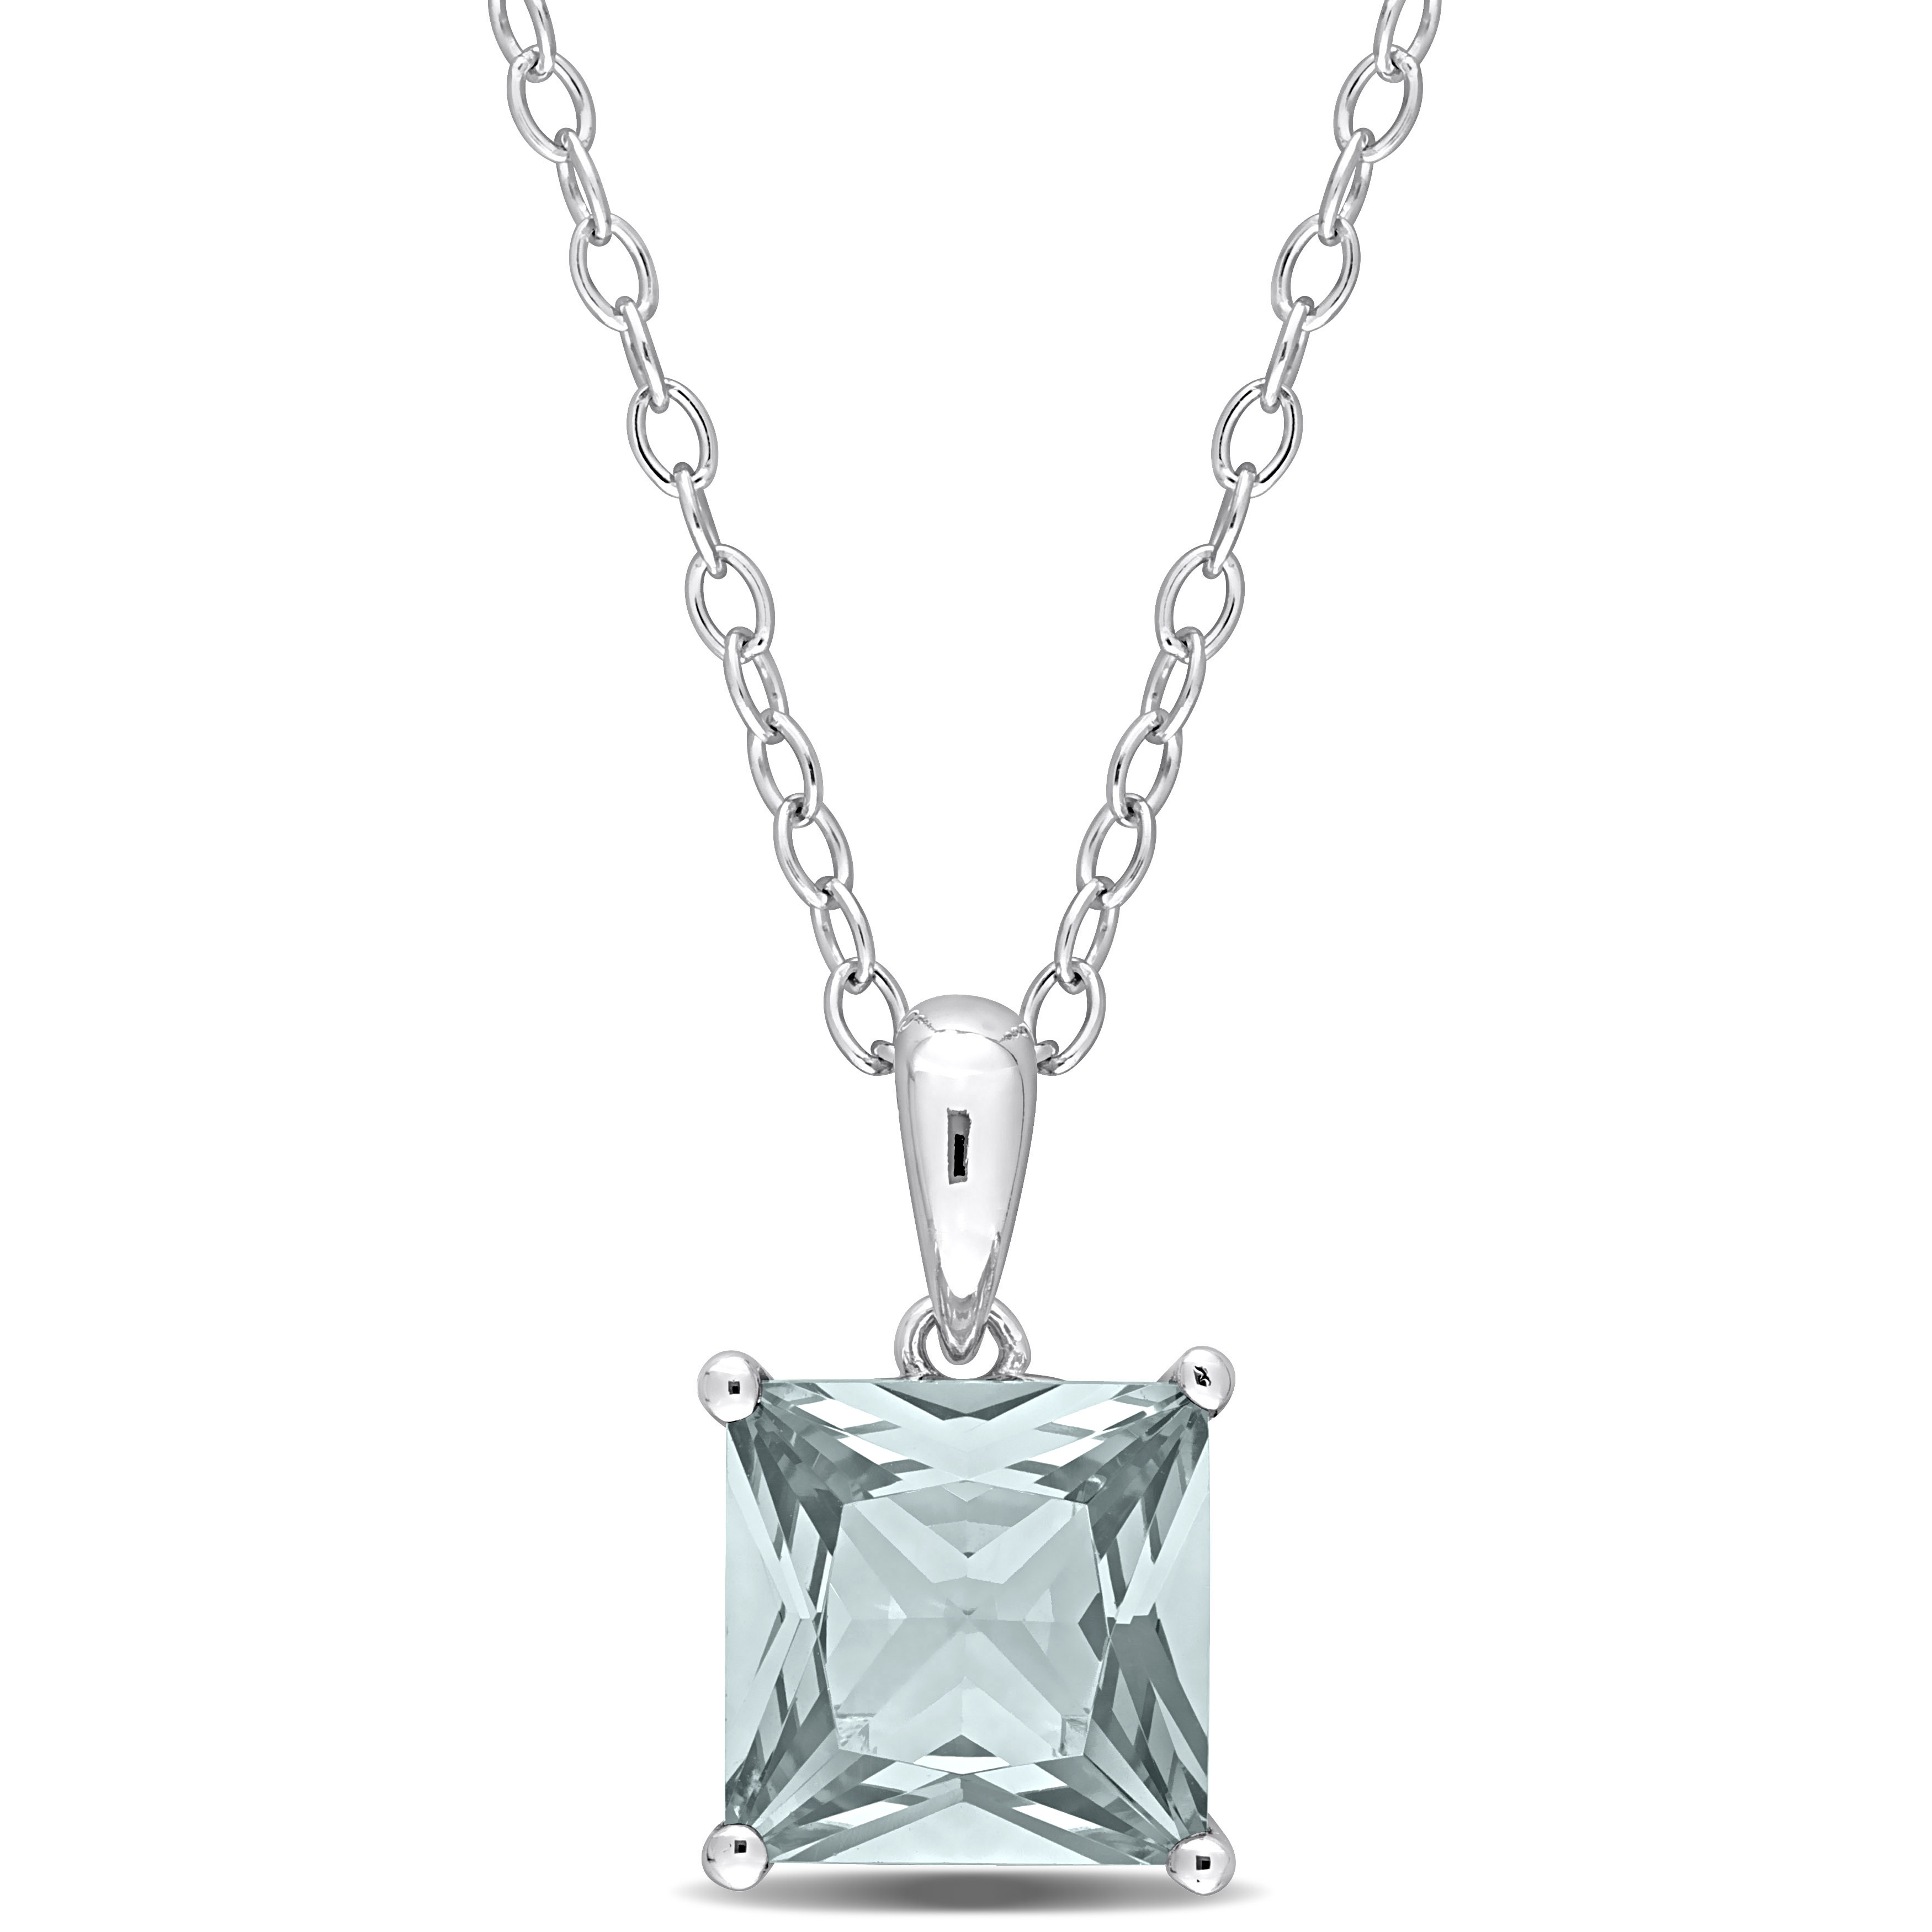 2 CT TGW Princess Cut Synthetic Spinel Solitaire Heart Design Pendant with Chain in Sterling Silver - 18 in.